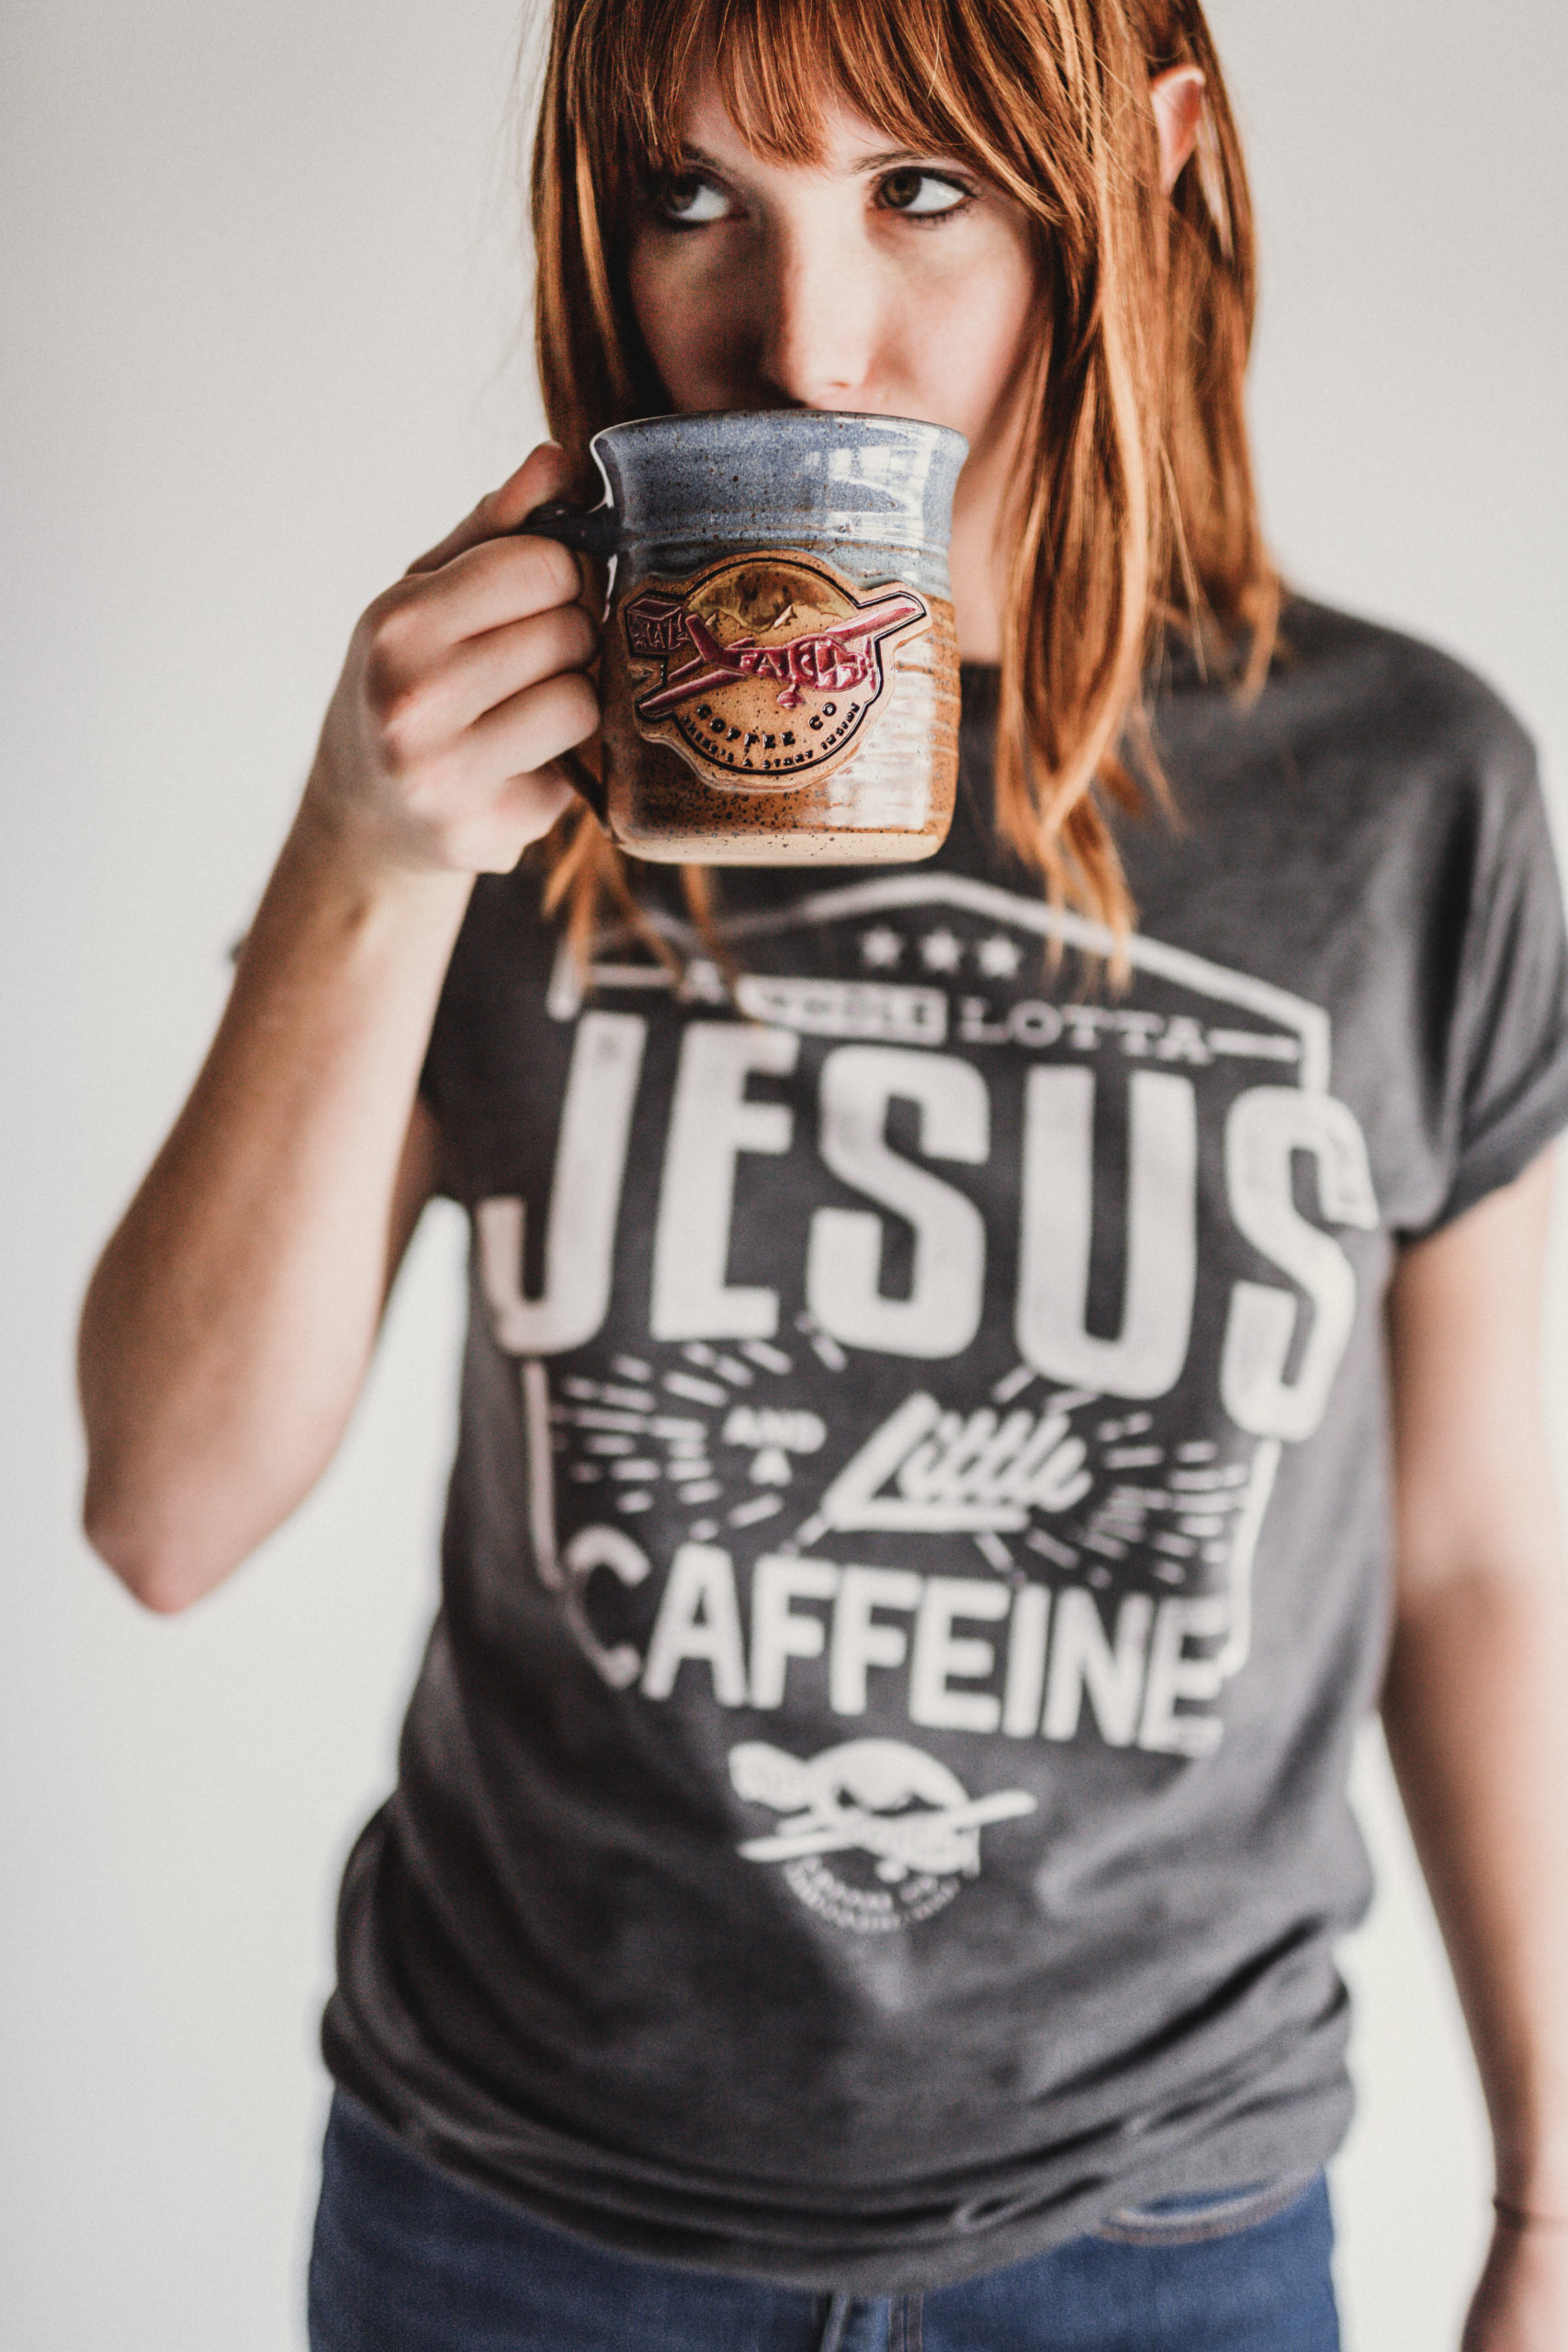 JSM Woman wearing a gray t shirt that says A Whole Lotta Jesus and a Little Caffeine from Crazy Faith drinking some coffee from a gray coffee cup